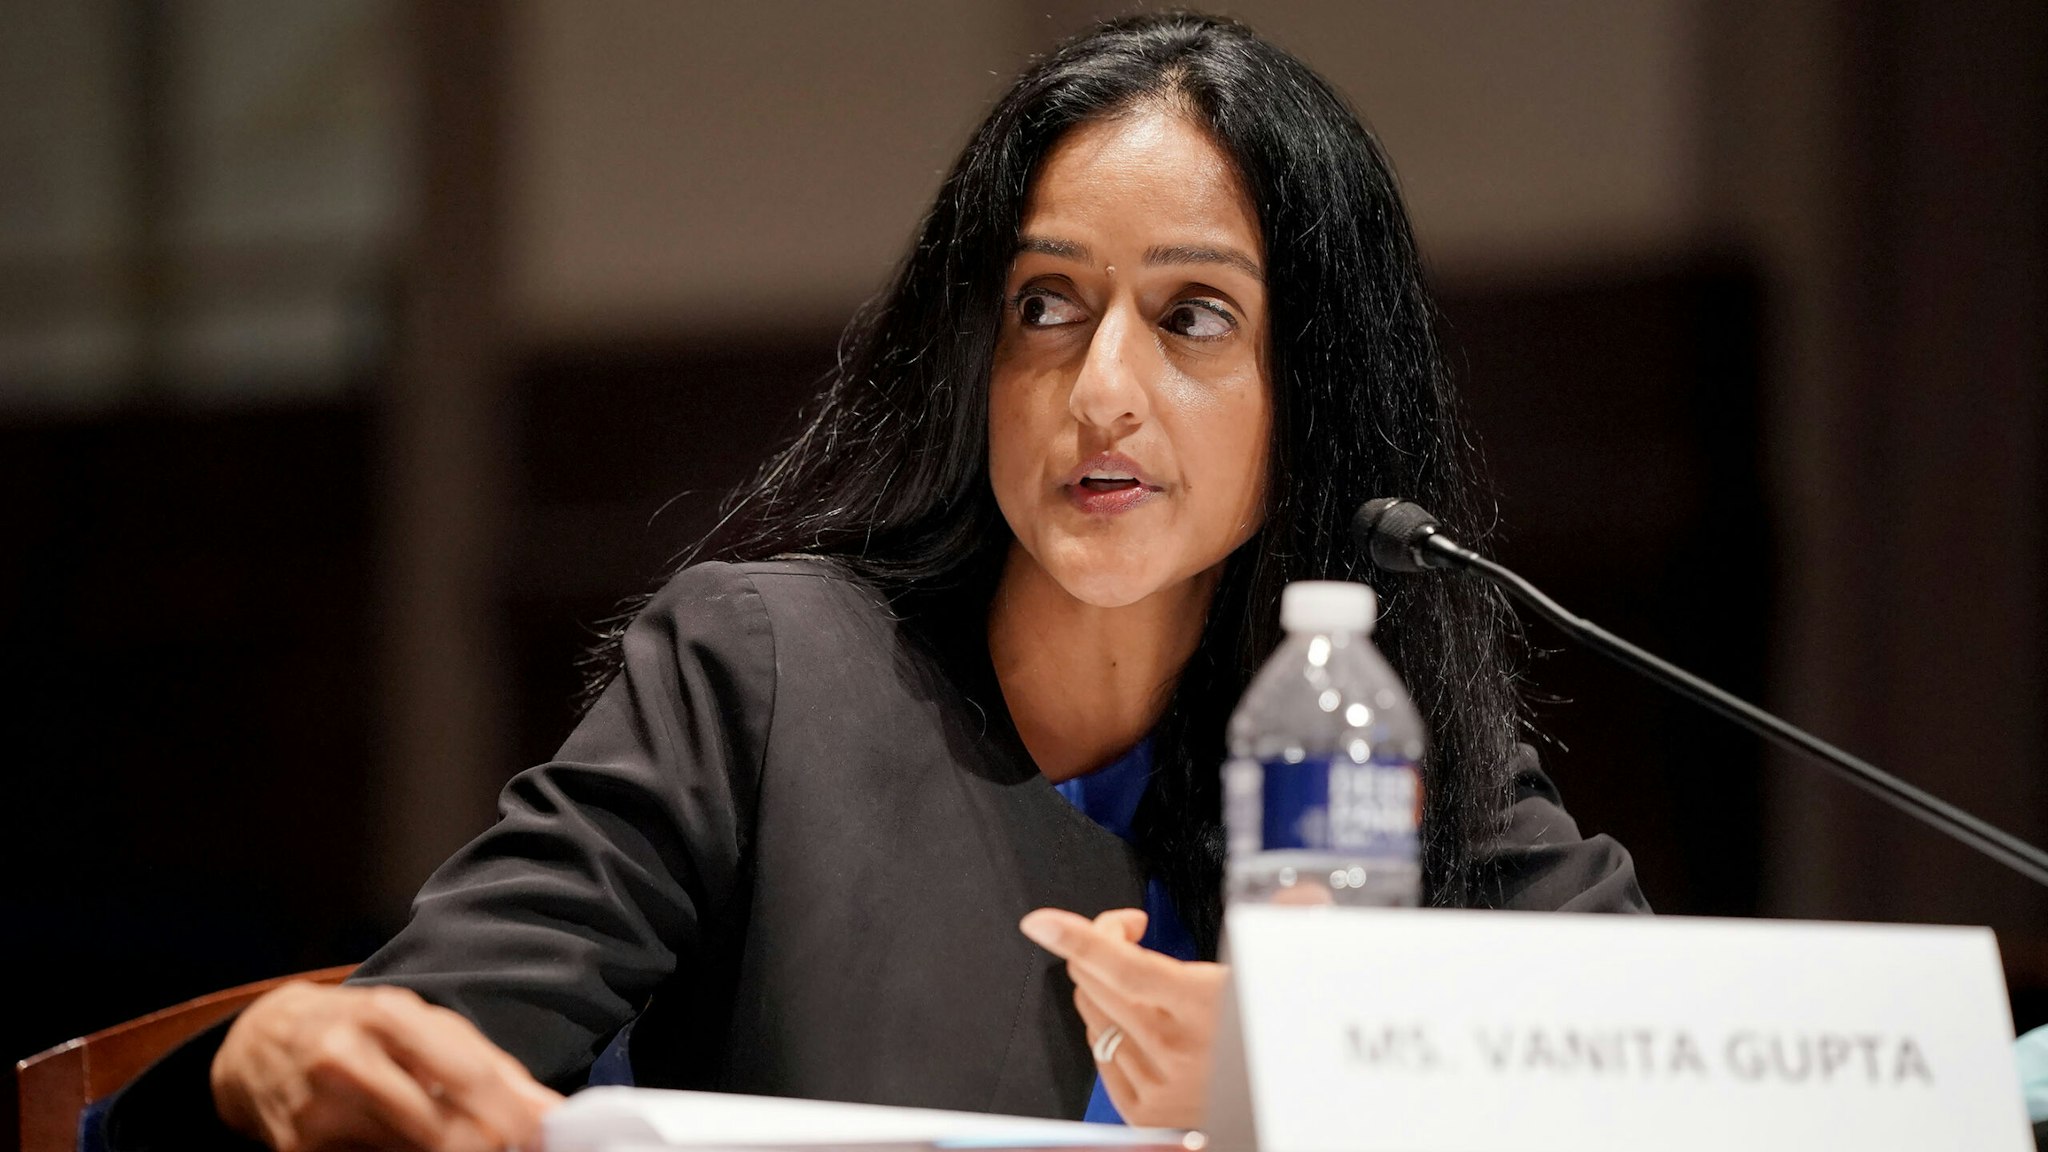 Vanita Gupta, president and chief executive officer of Leadership Conference for Civil Rights, speaks during a House Judiciary Committee hearing in Washington, D.C., U.S., on Wednesday, June 10, 2020. The House is considering a broad slate of proposals that could make it easier to prosecute and sue officers, ban federal officers from using chokeholds, create a national registry for police violations, and require police departments that get federal funds to conduct bias training and use de-escalation tactics.